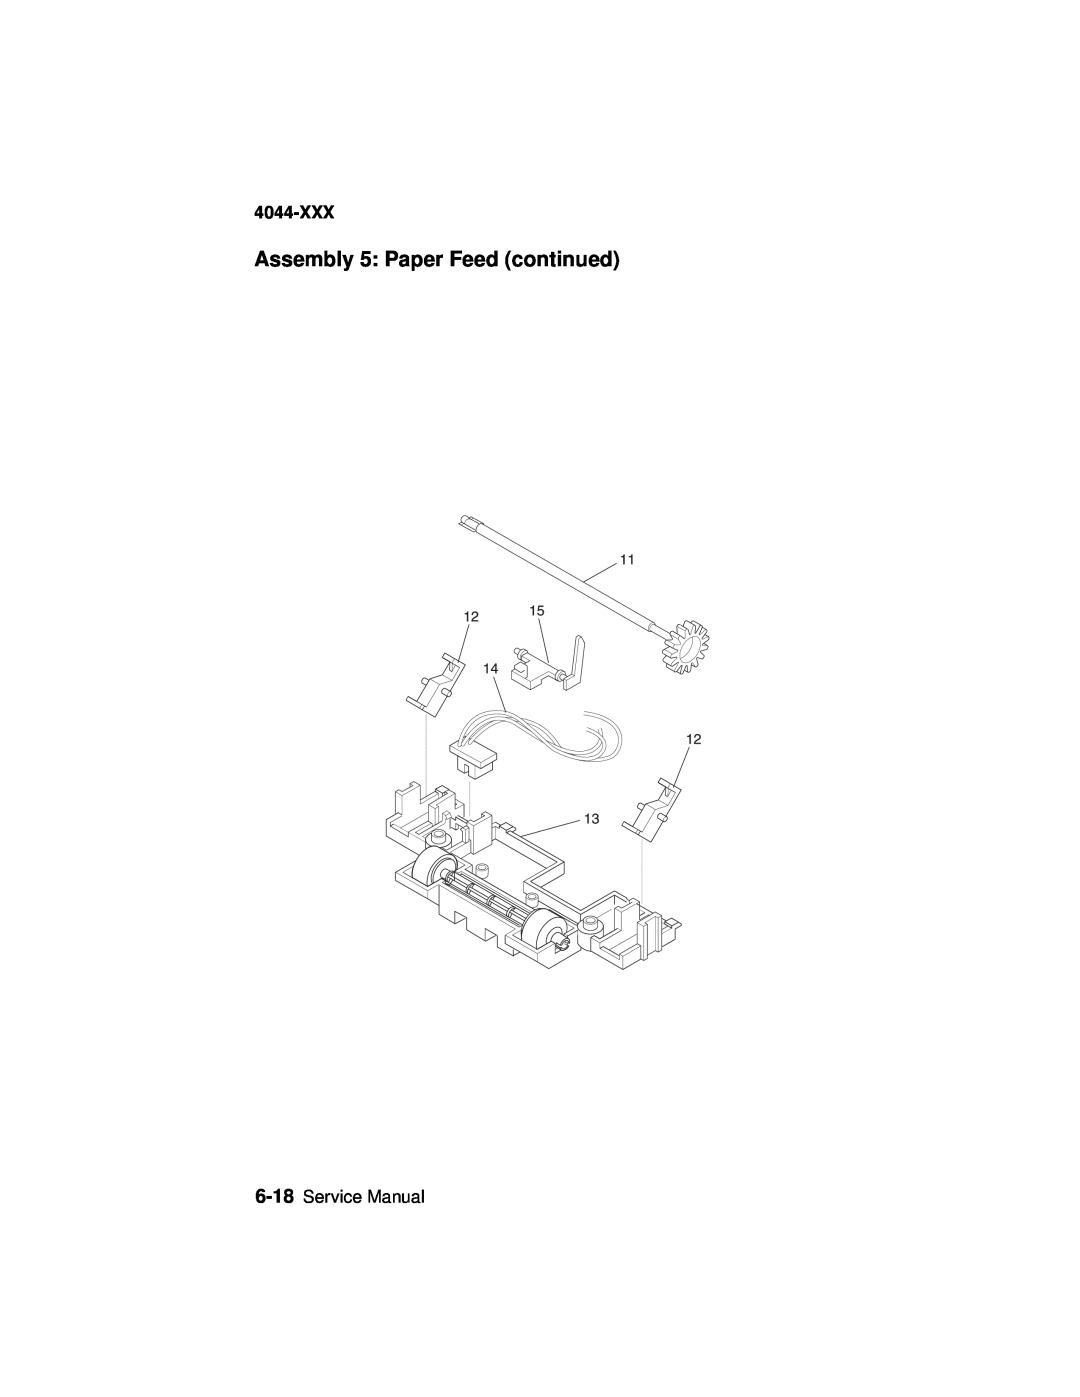 Lexmark 4044-XXX, E310 manual Assembly 5: Paper Feed continued, Service Manual 